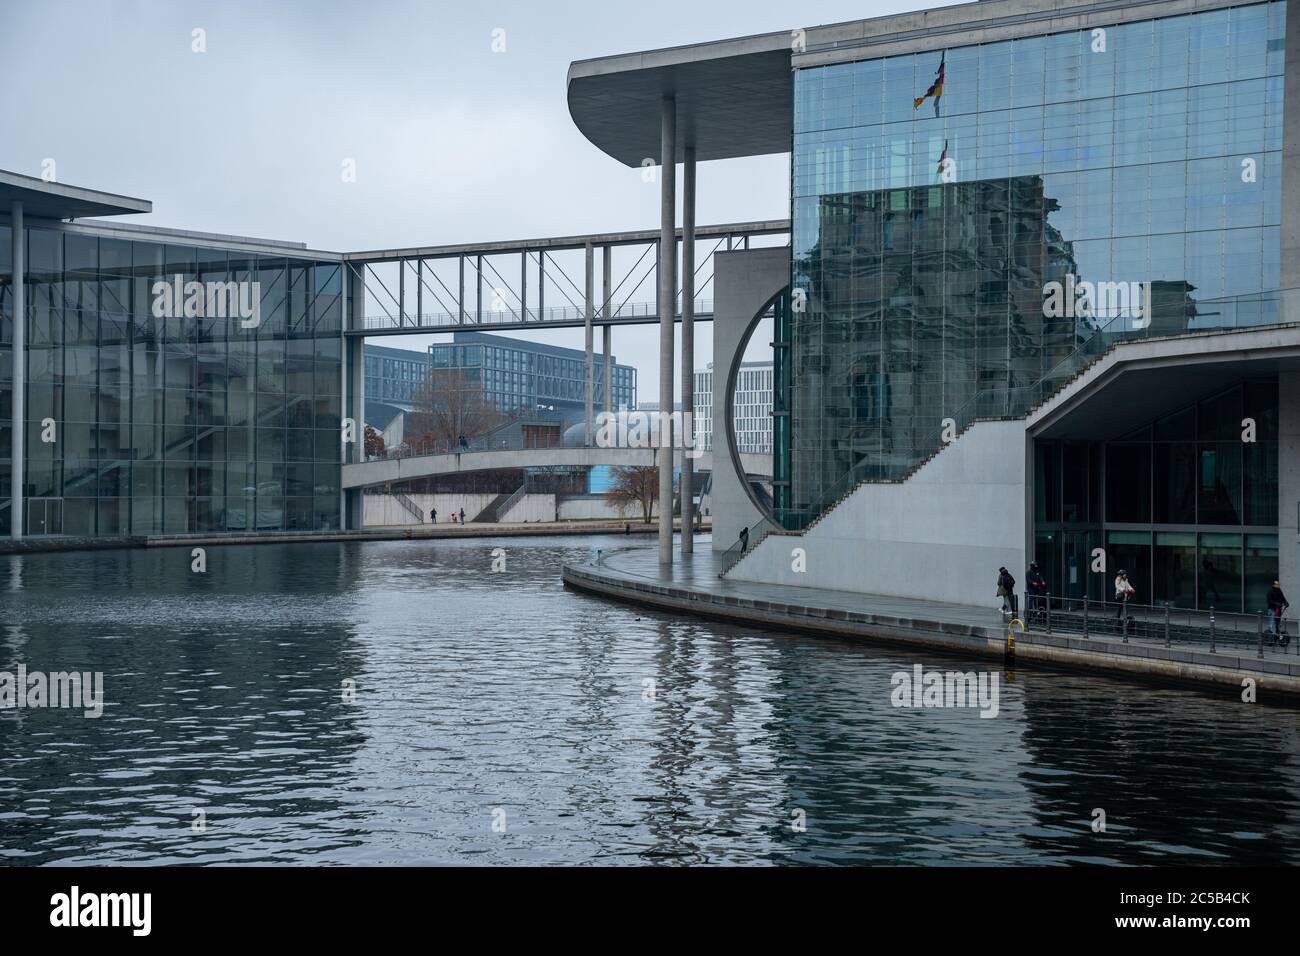 Marie-Elisabeth-Lüders-Haus government building with people passing by and the Spree river. Berlin, Germany. Stock Photo